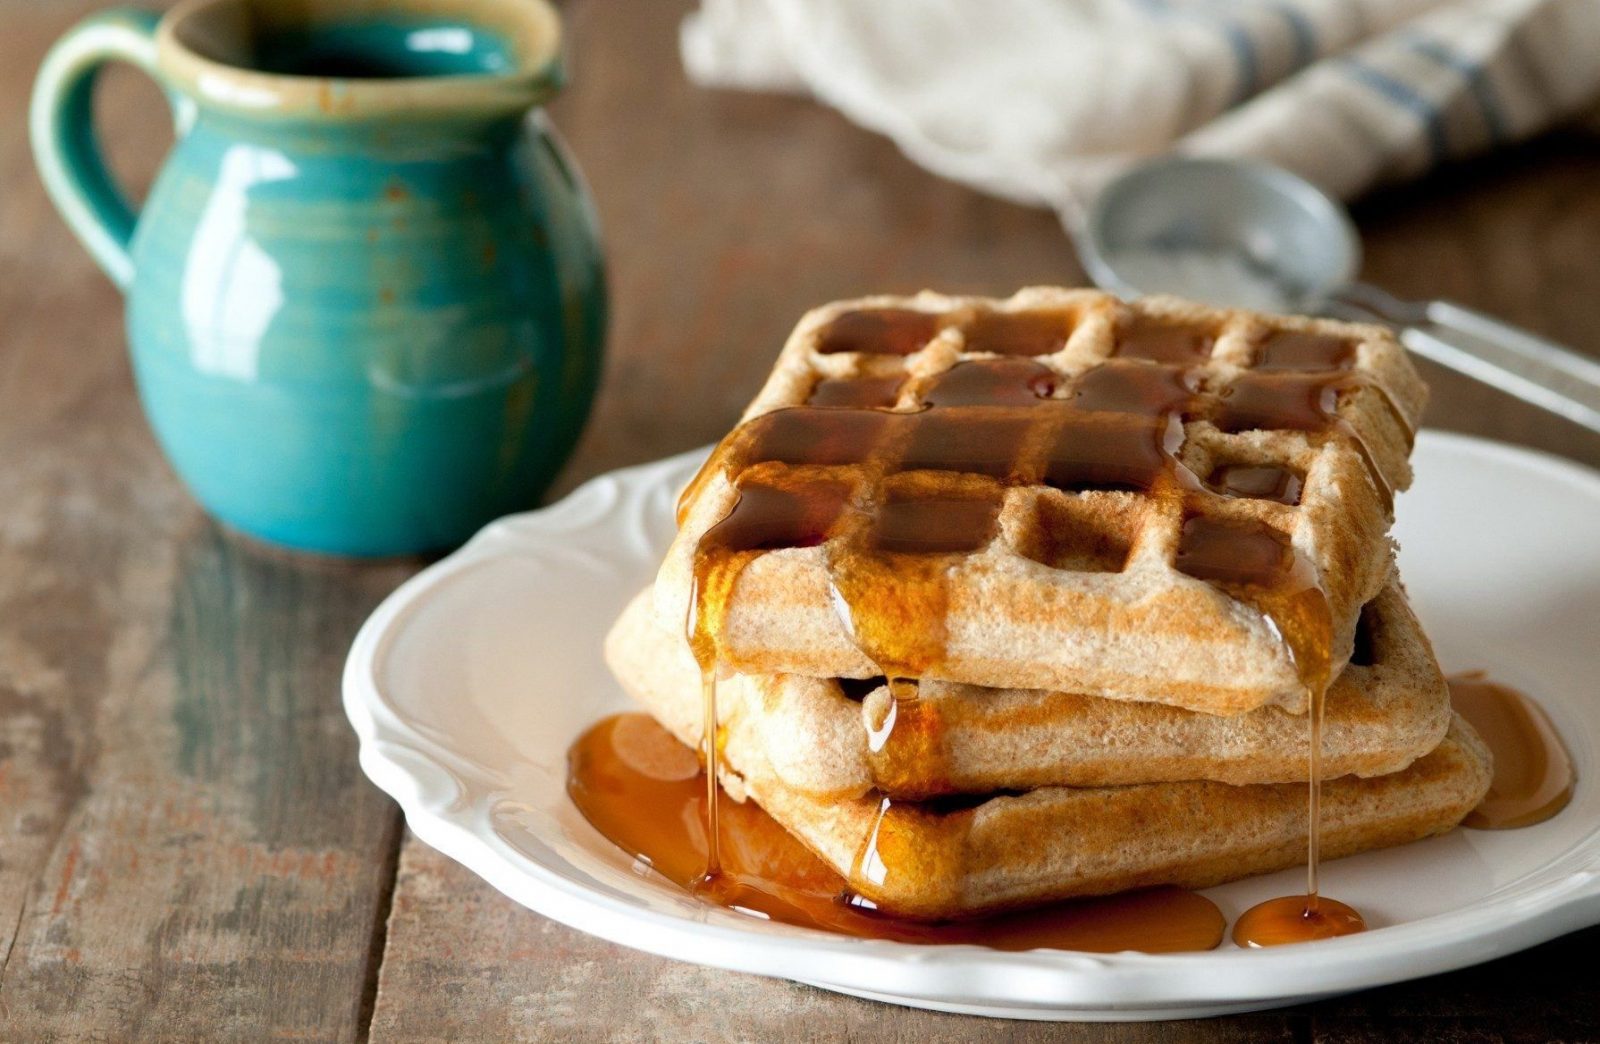 Eat Food for Each Letter of Alphabet to Know Your Menta… Quiz Waffles With Maple Syrup